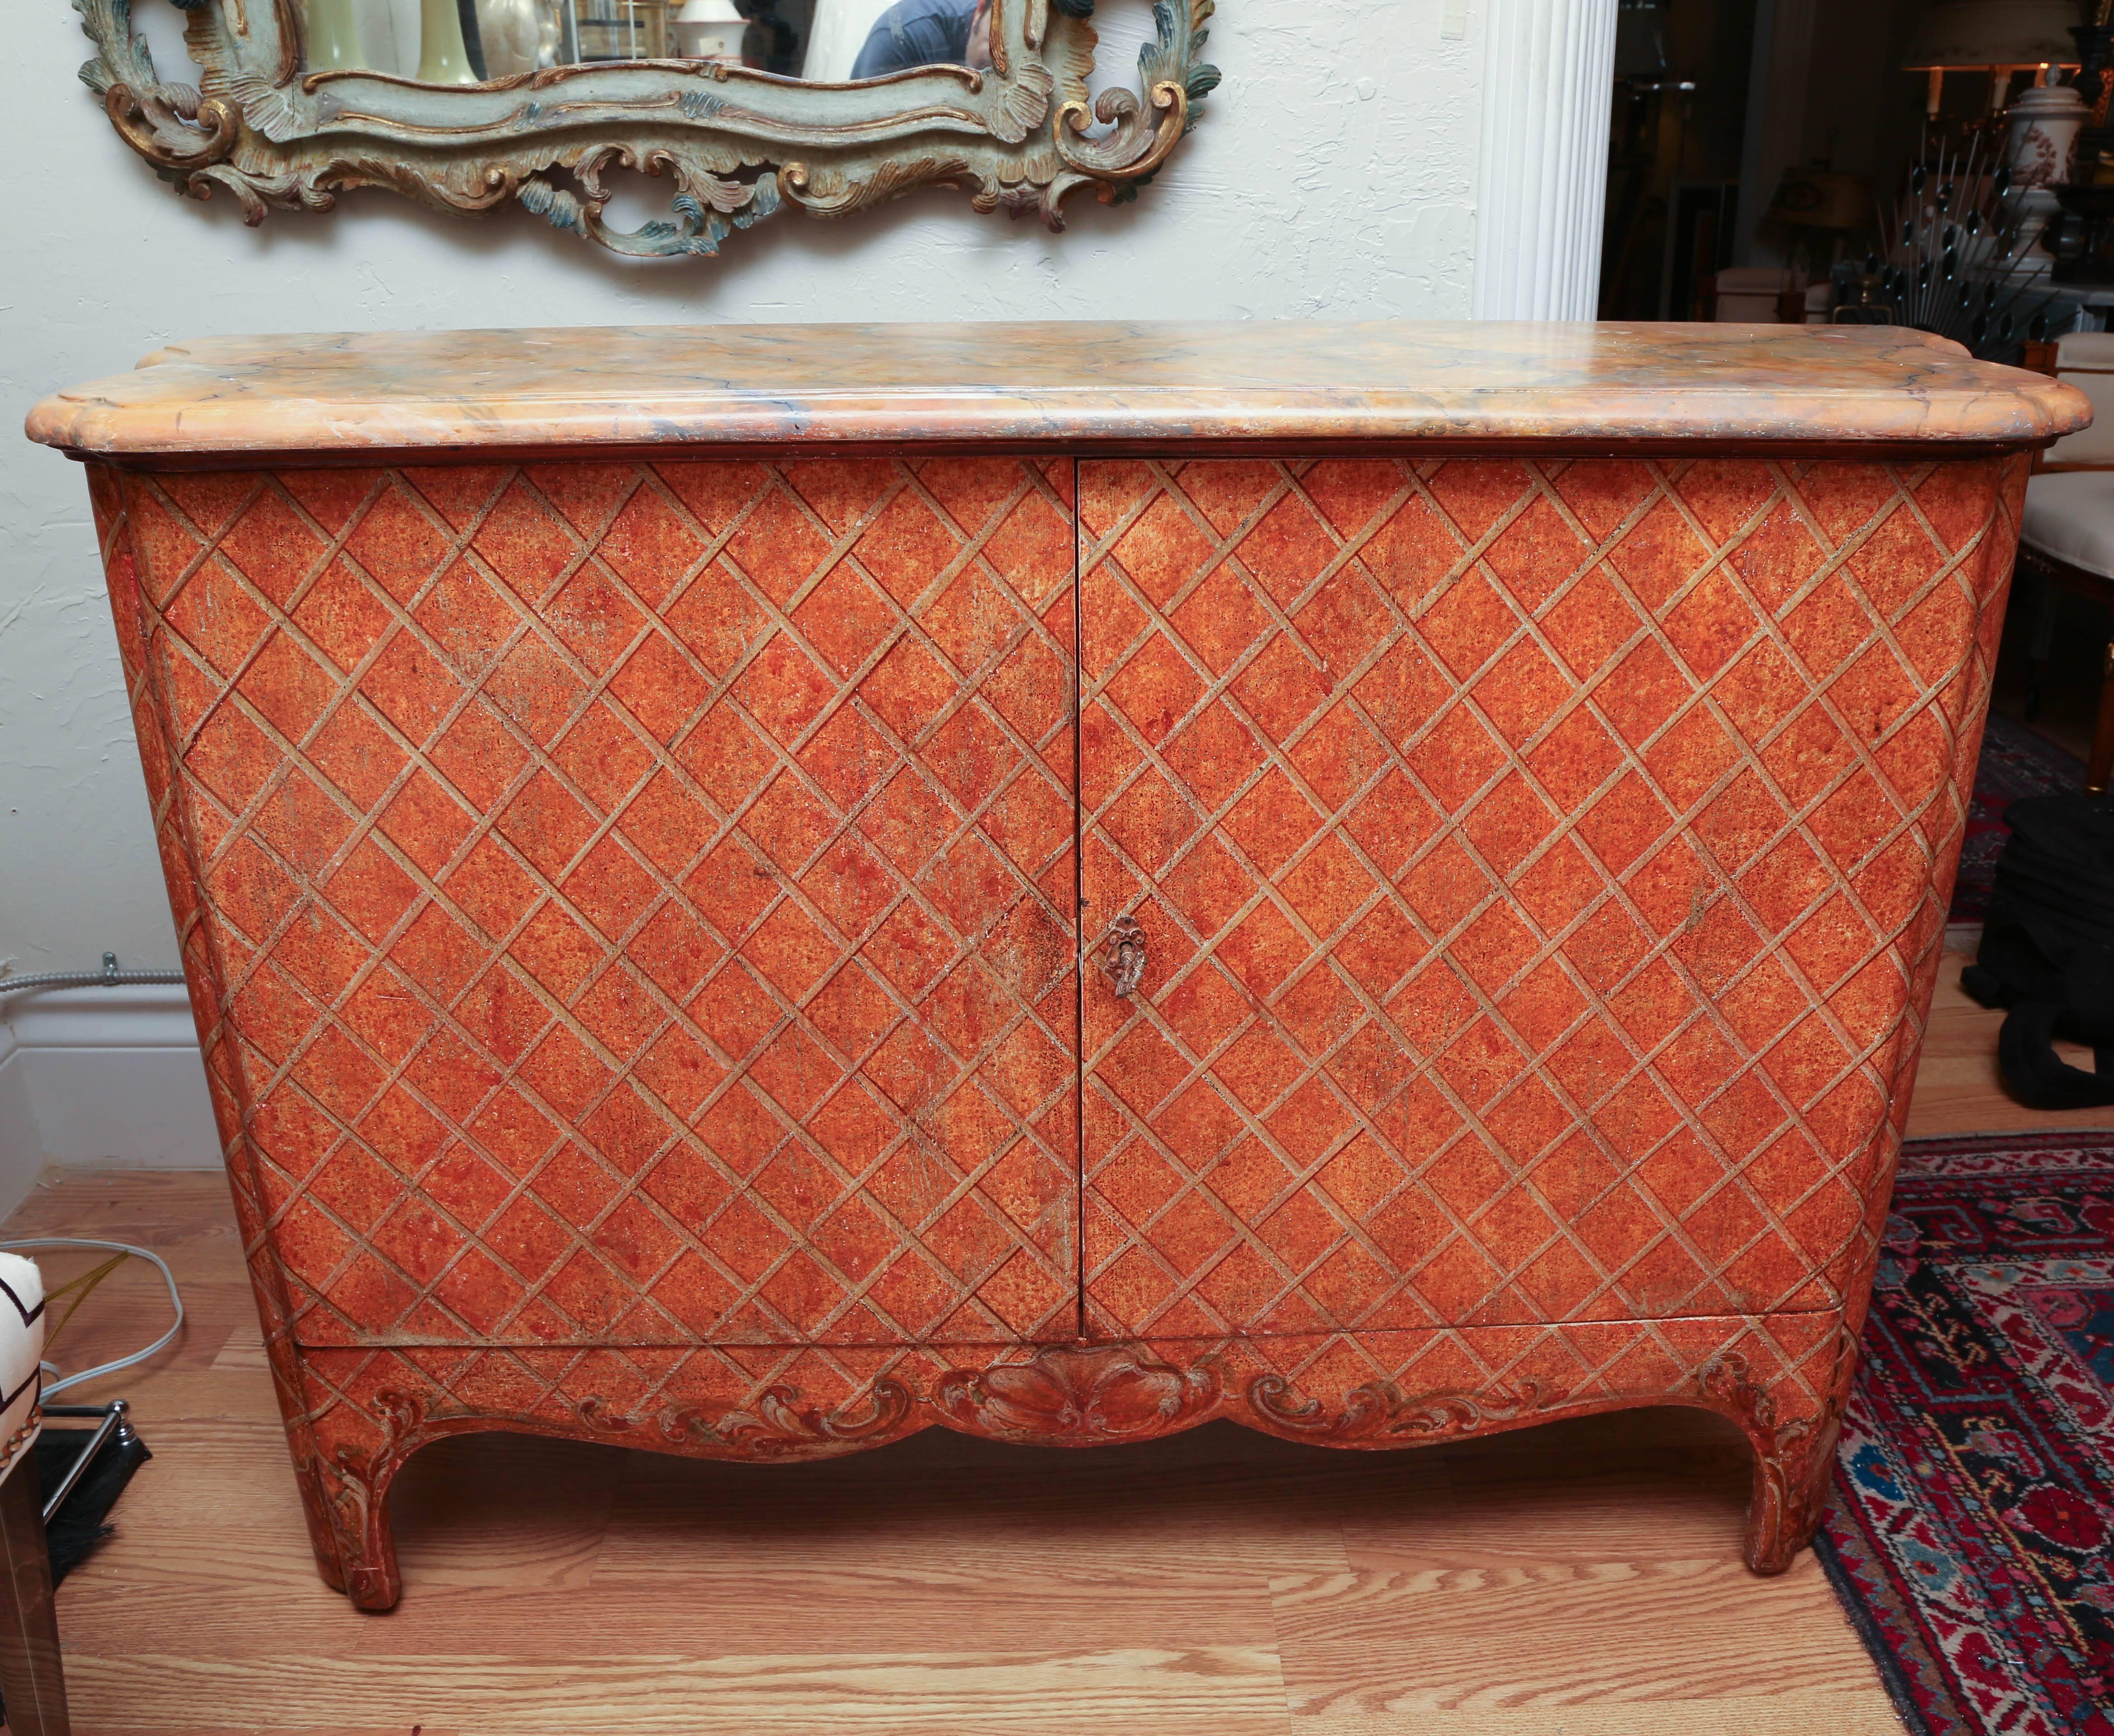 Two-door Italian hand-painted cabinet with an overall trellis design and faux marbleized top. Interior is paper with one shelf in center.